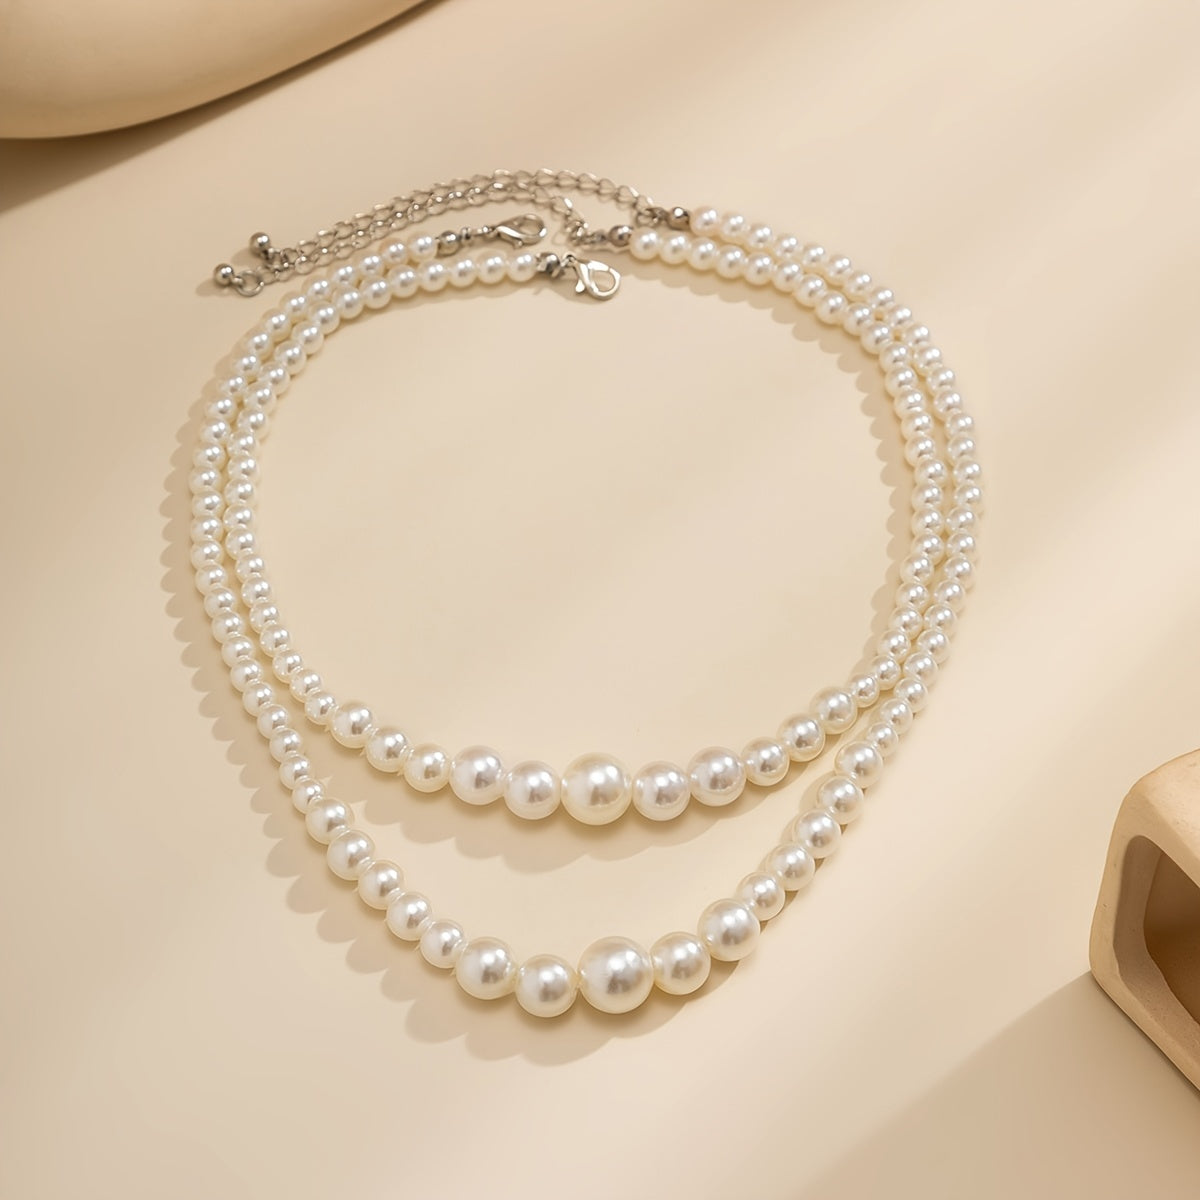 2-Piece Pearl Beading Set: Add a Touch of Elegance to Your Look with These Trendy Jewelry Accessories!